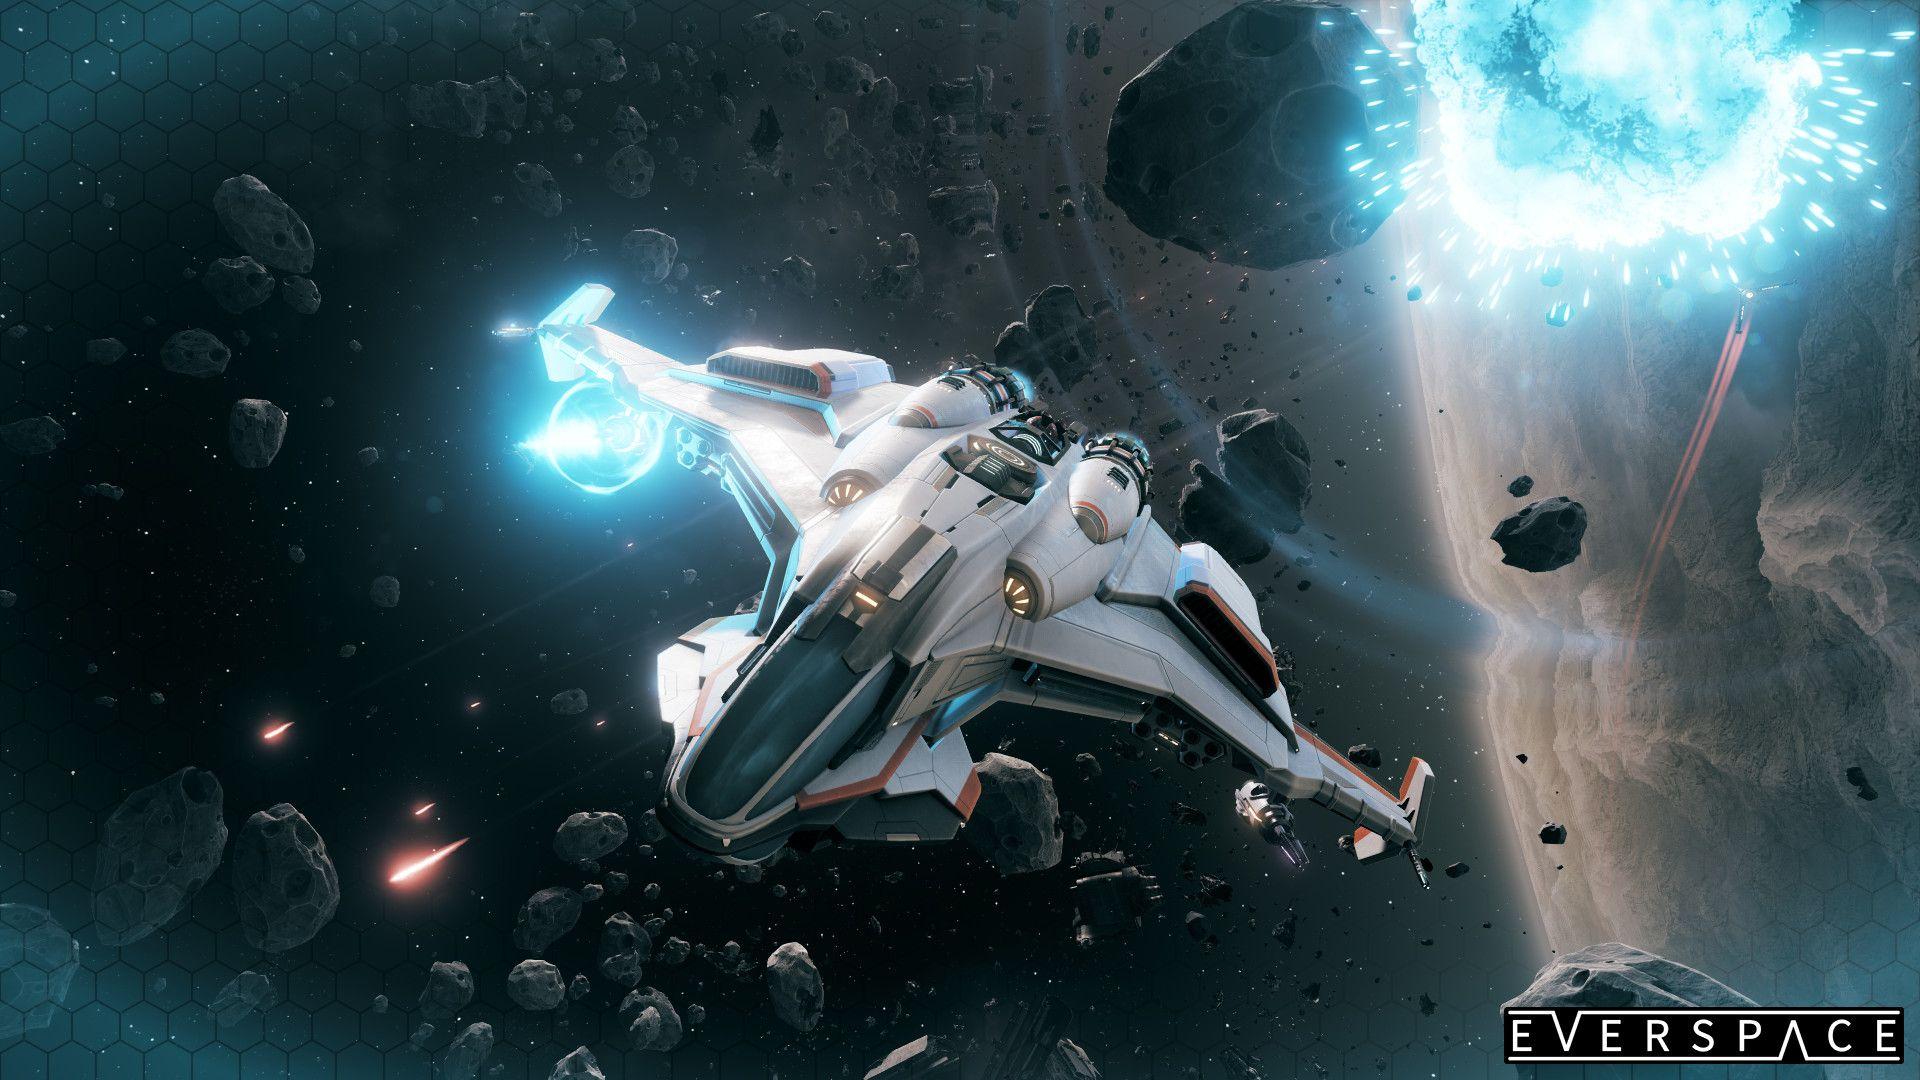 Everspace Full HD Wallpaper and Background Imagex1080